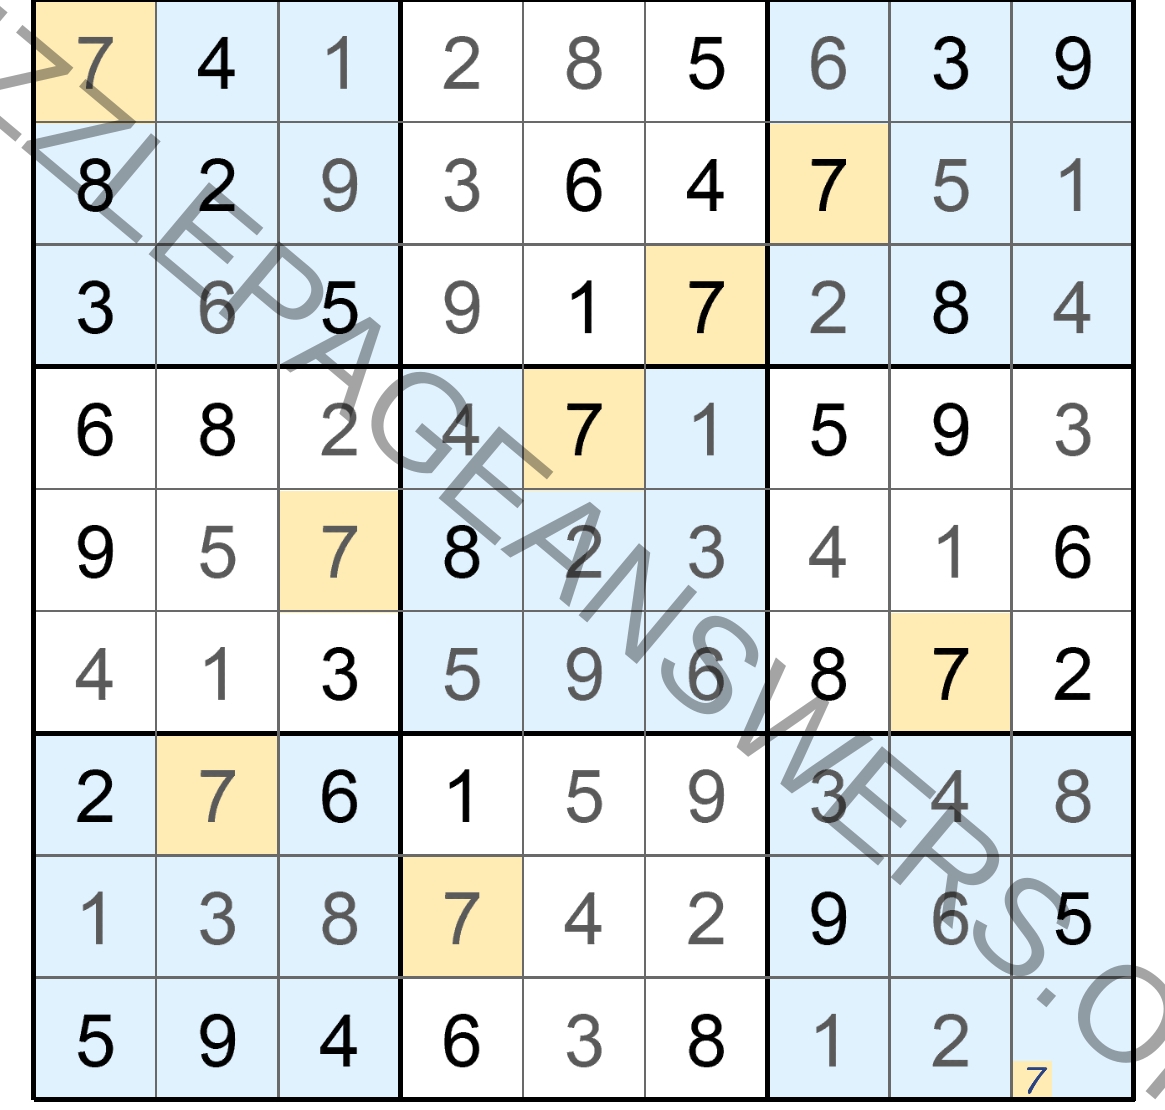 Puzzle Page Sudoku July 11 2021 Answers Puzzle Page Answers